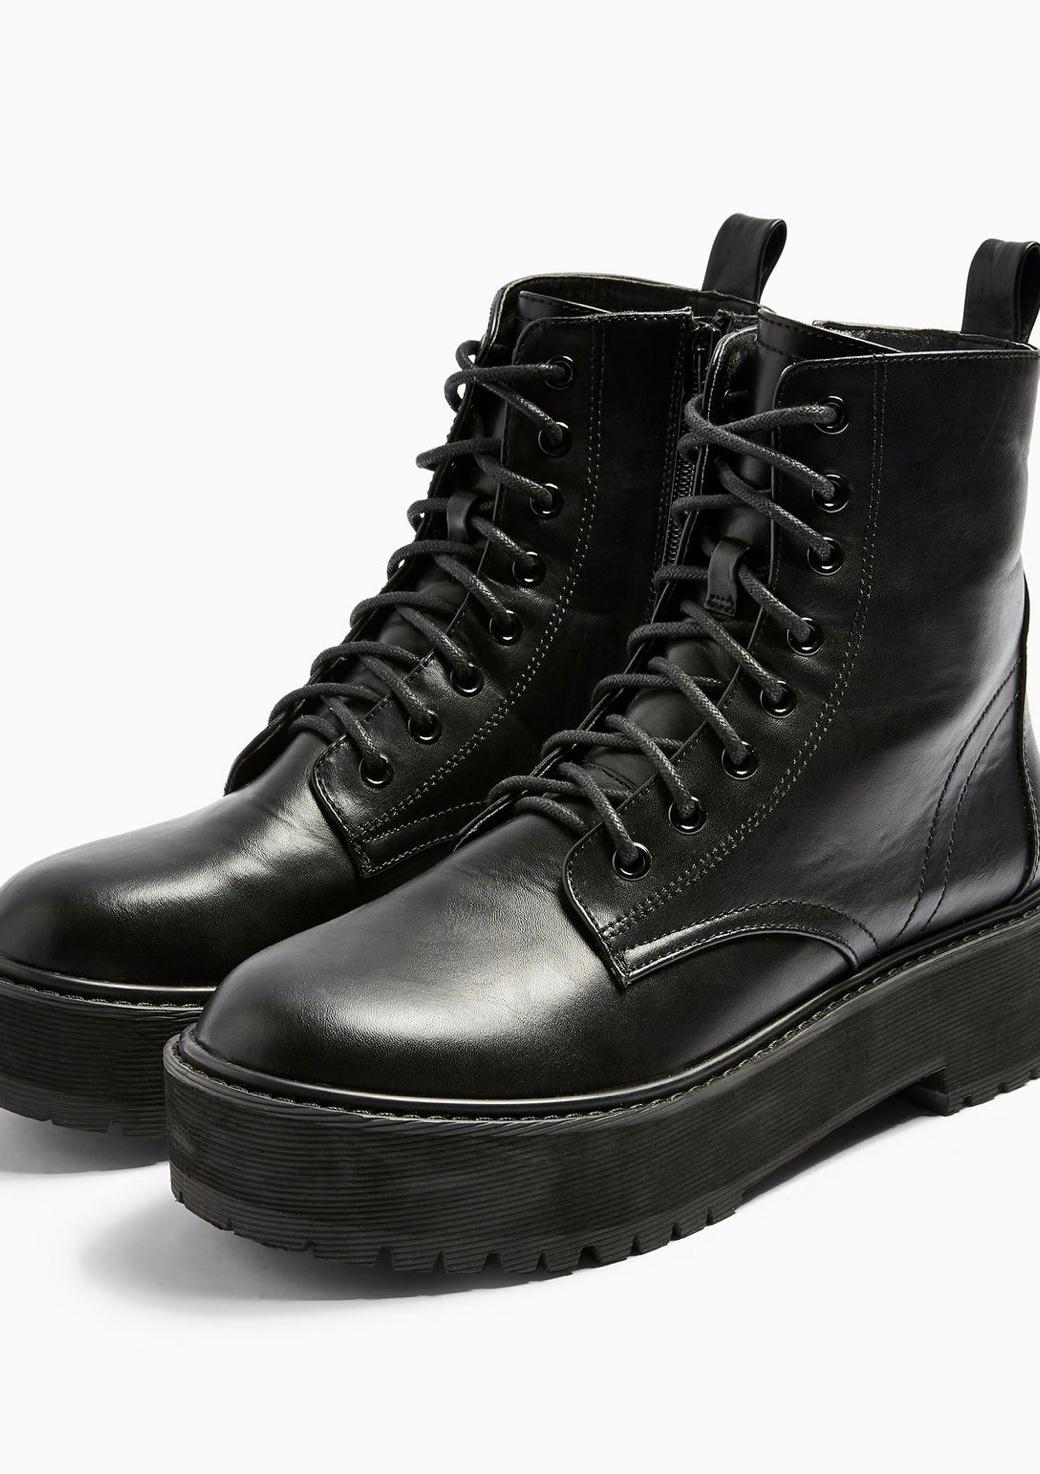 Our Top 10 Winter Boots - Style of the 